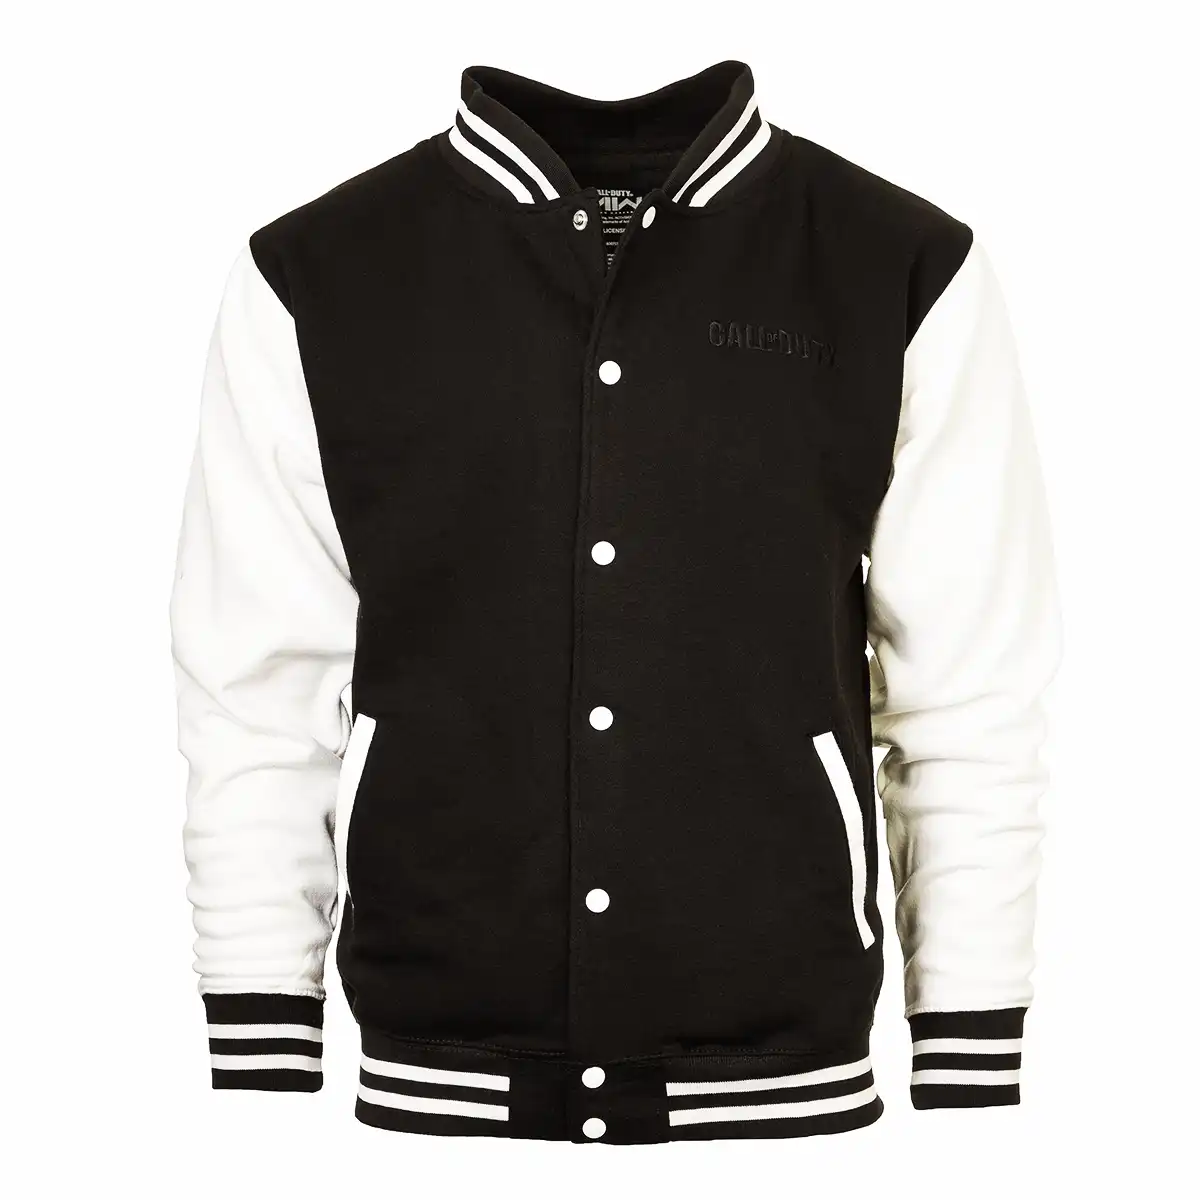 Call of Duty College Jacket "Ghost" Black/White M Cover